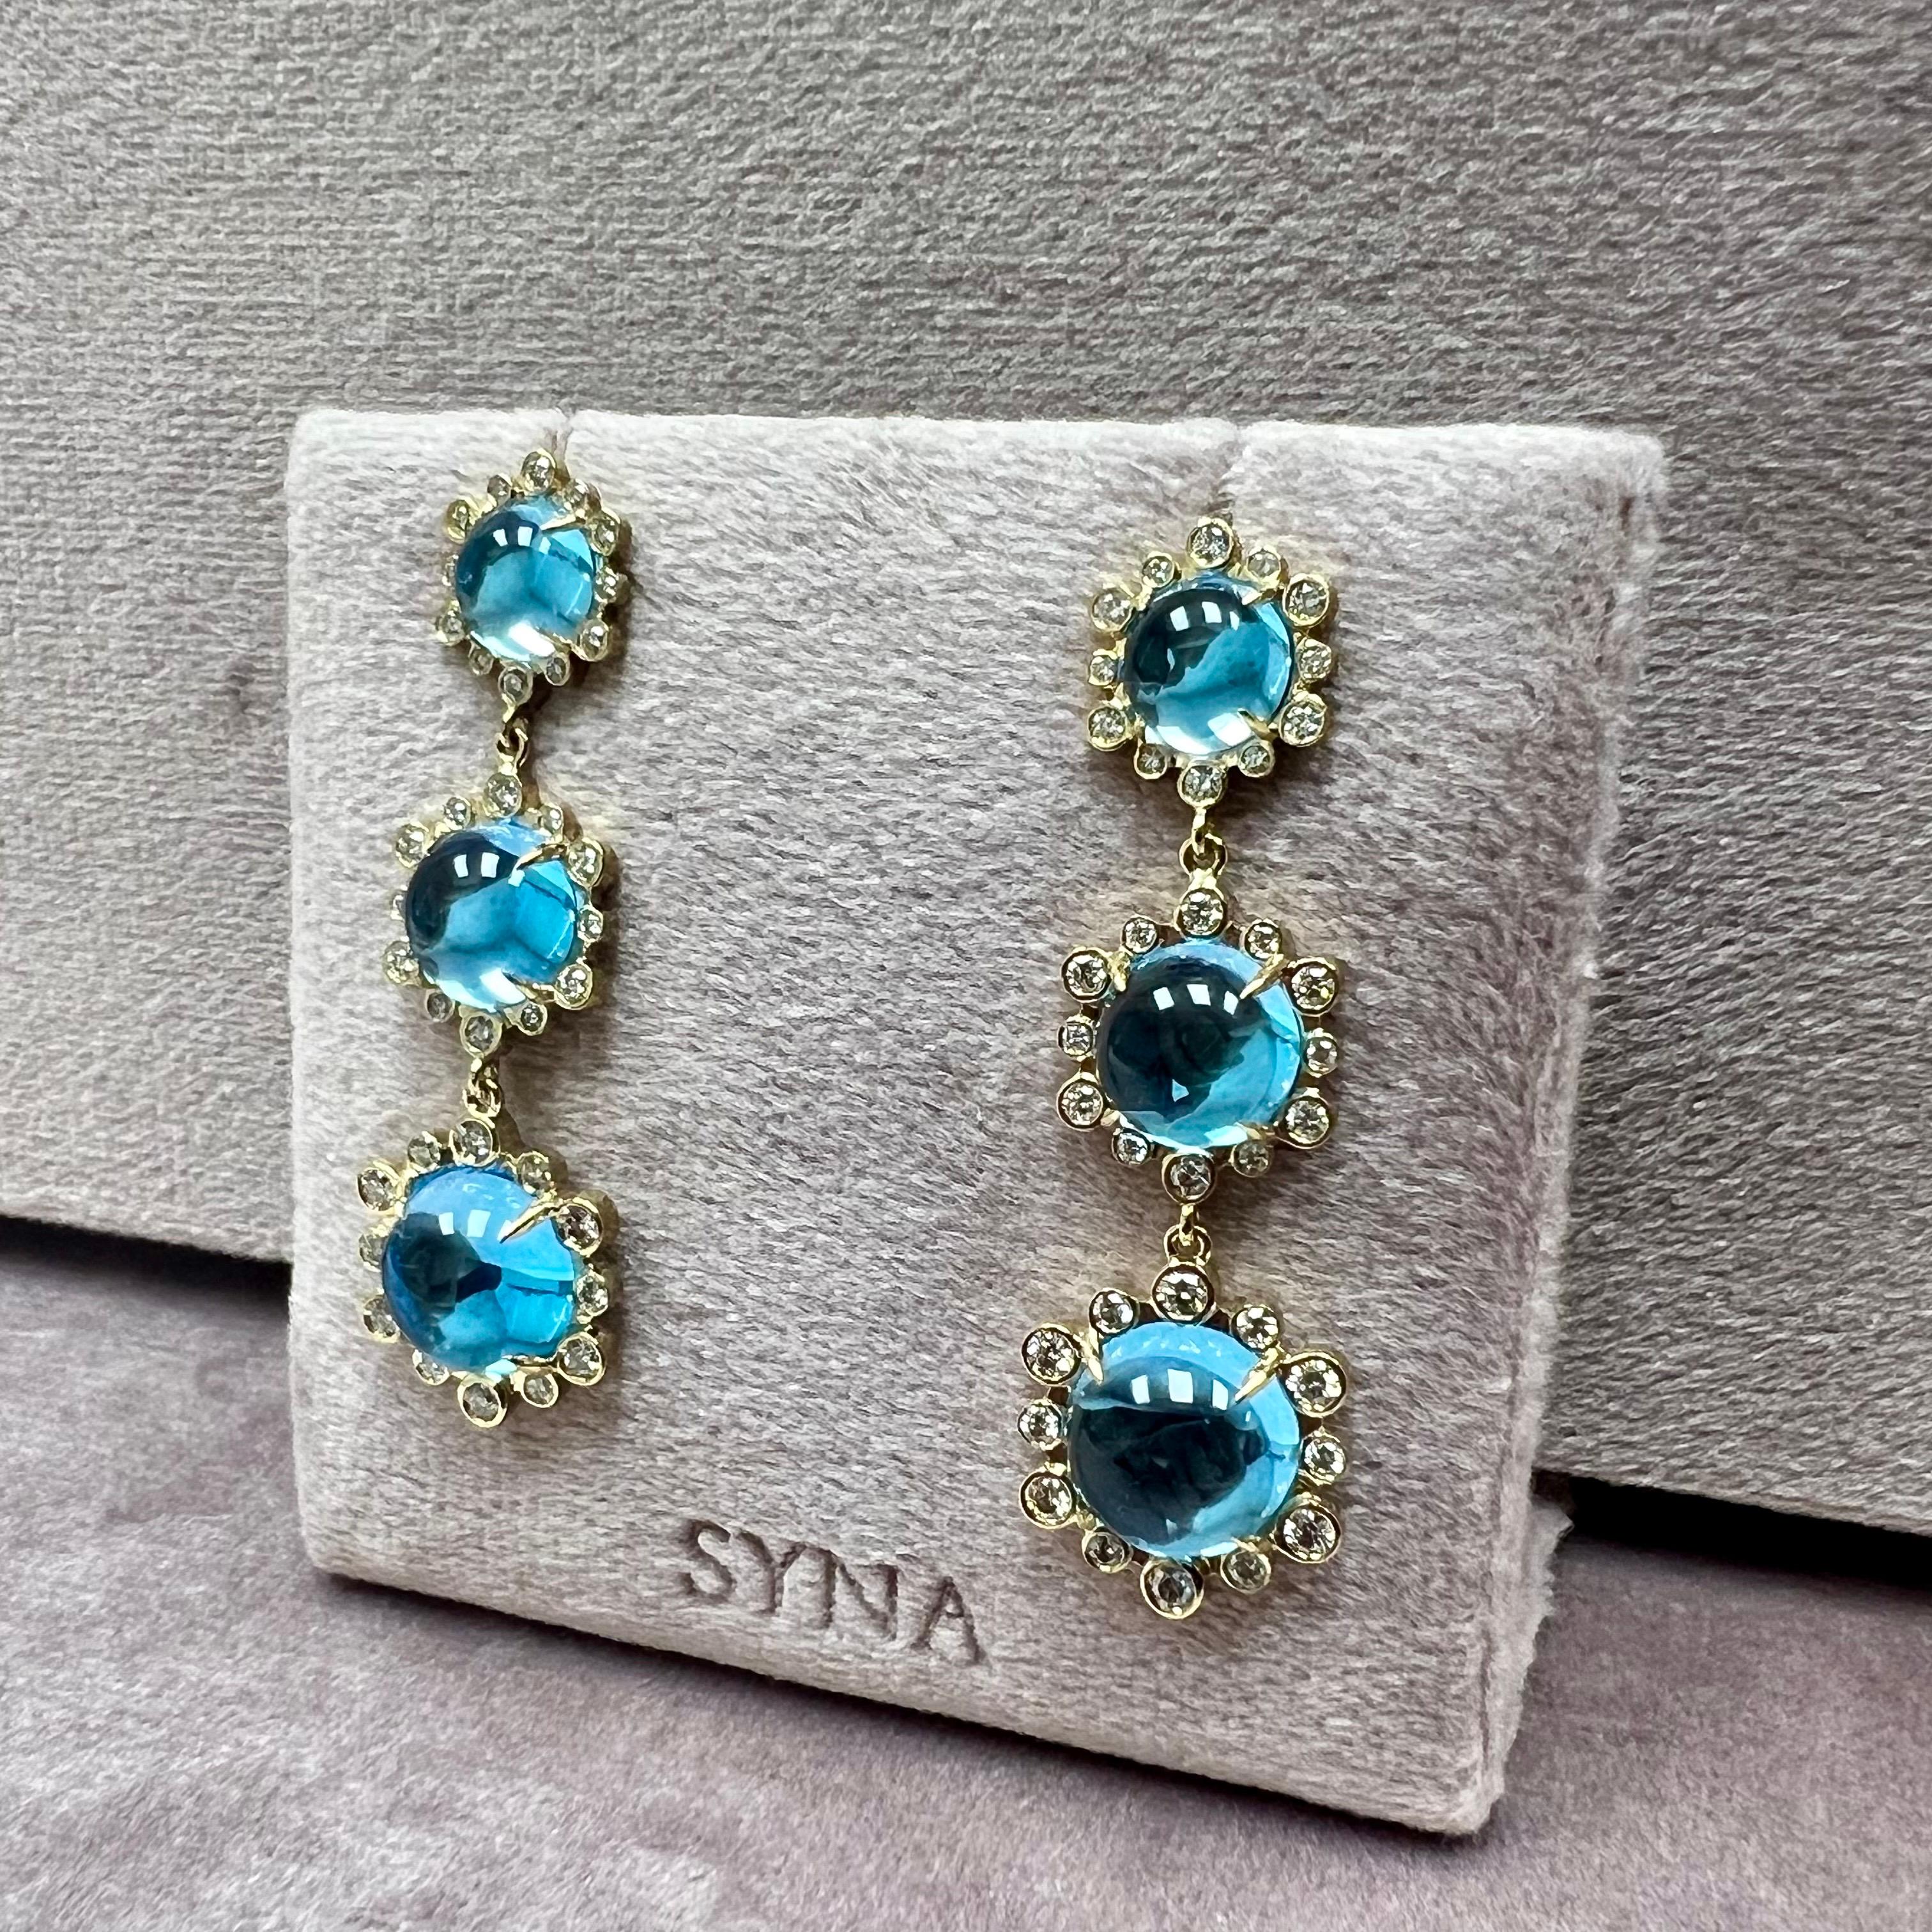 Contemporary Syna Yellow Gold Mogul Hex Earrings with Blue Topaz and Diamonds For Sale